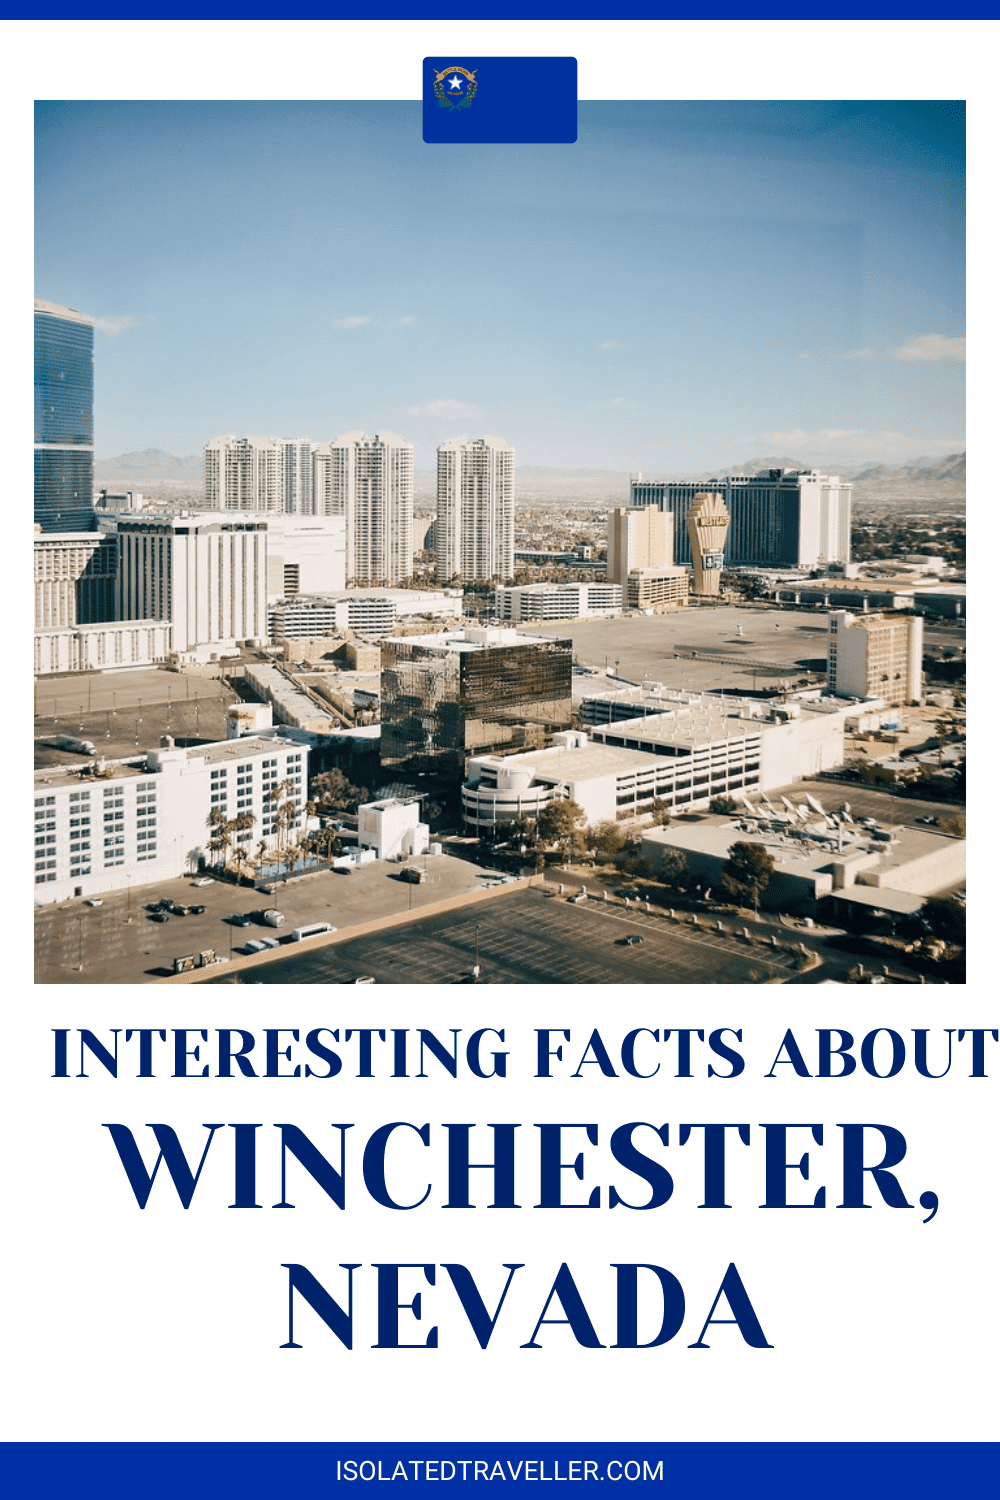 Facts About Winchester, Nevada